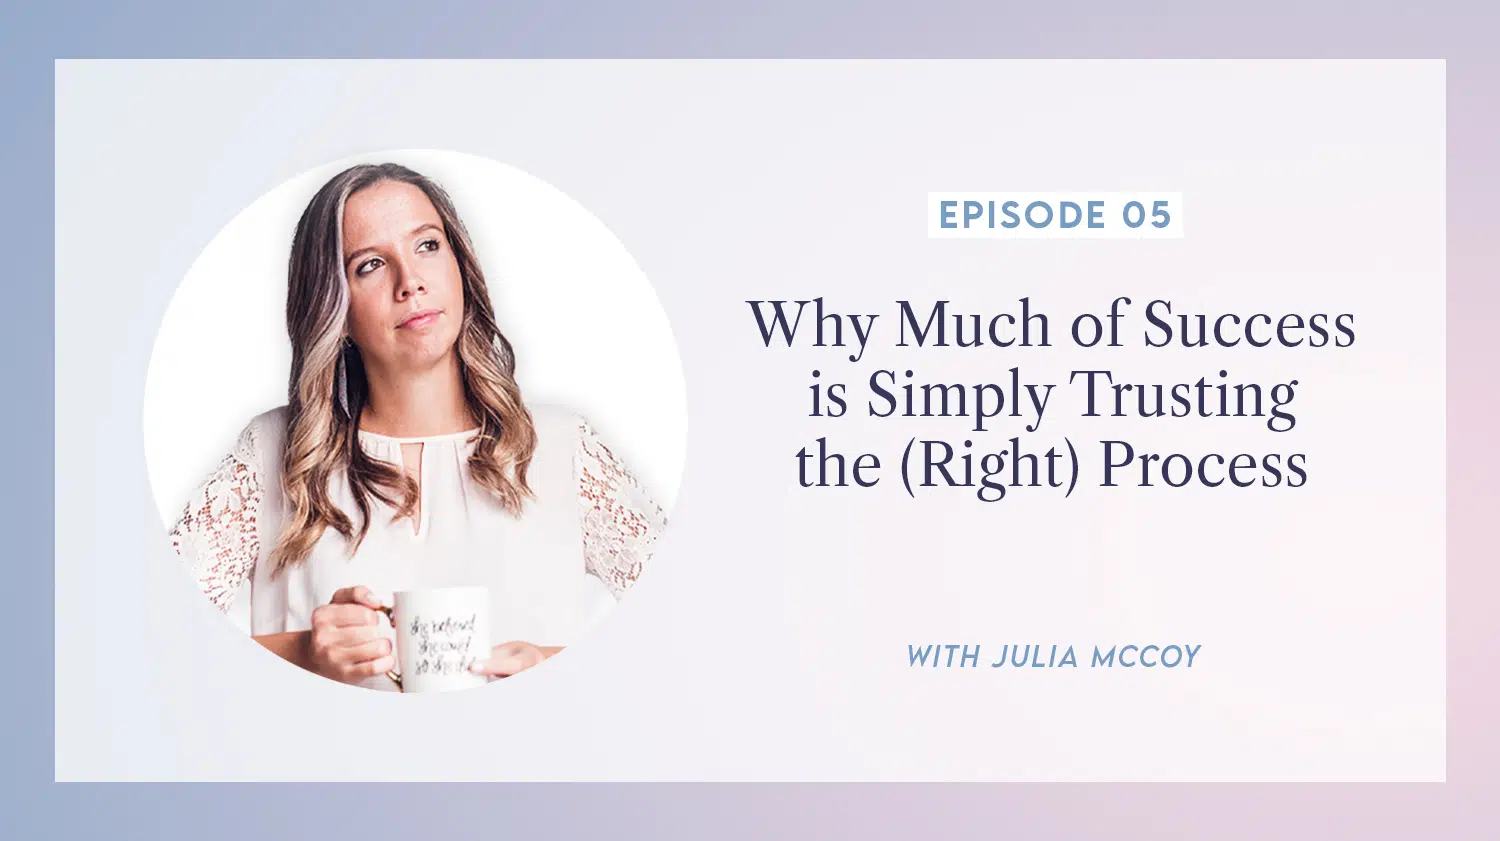 content transformation podcast with julia mccoy episode 5 why much of success is simply trusting the process